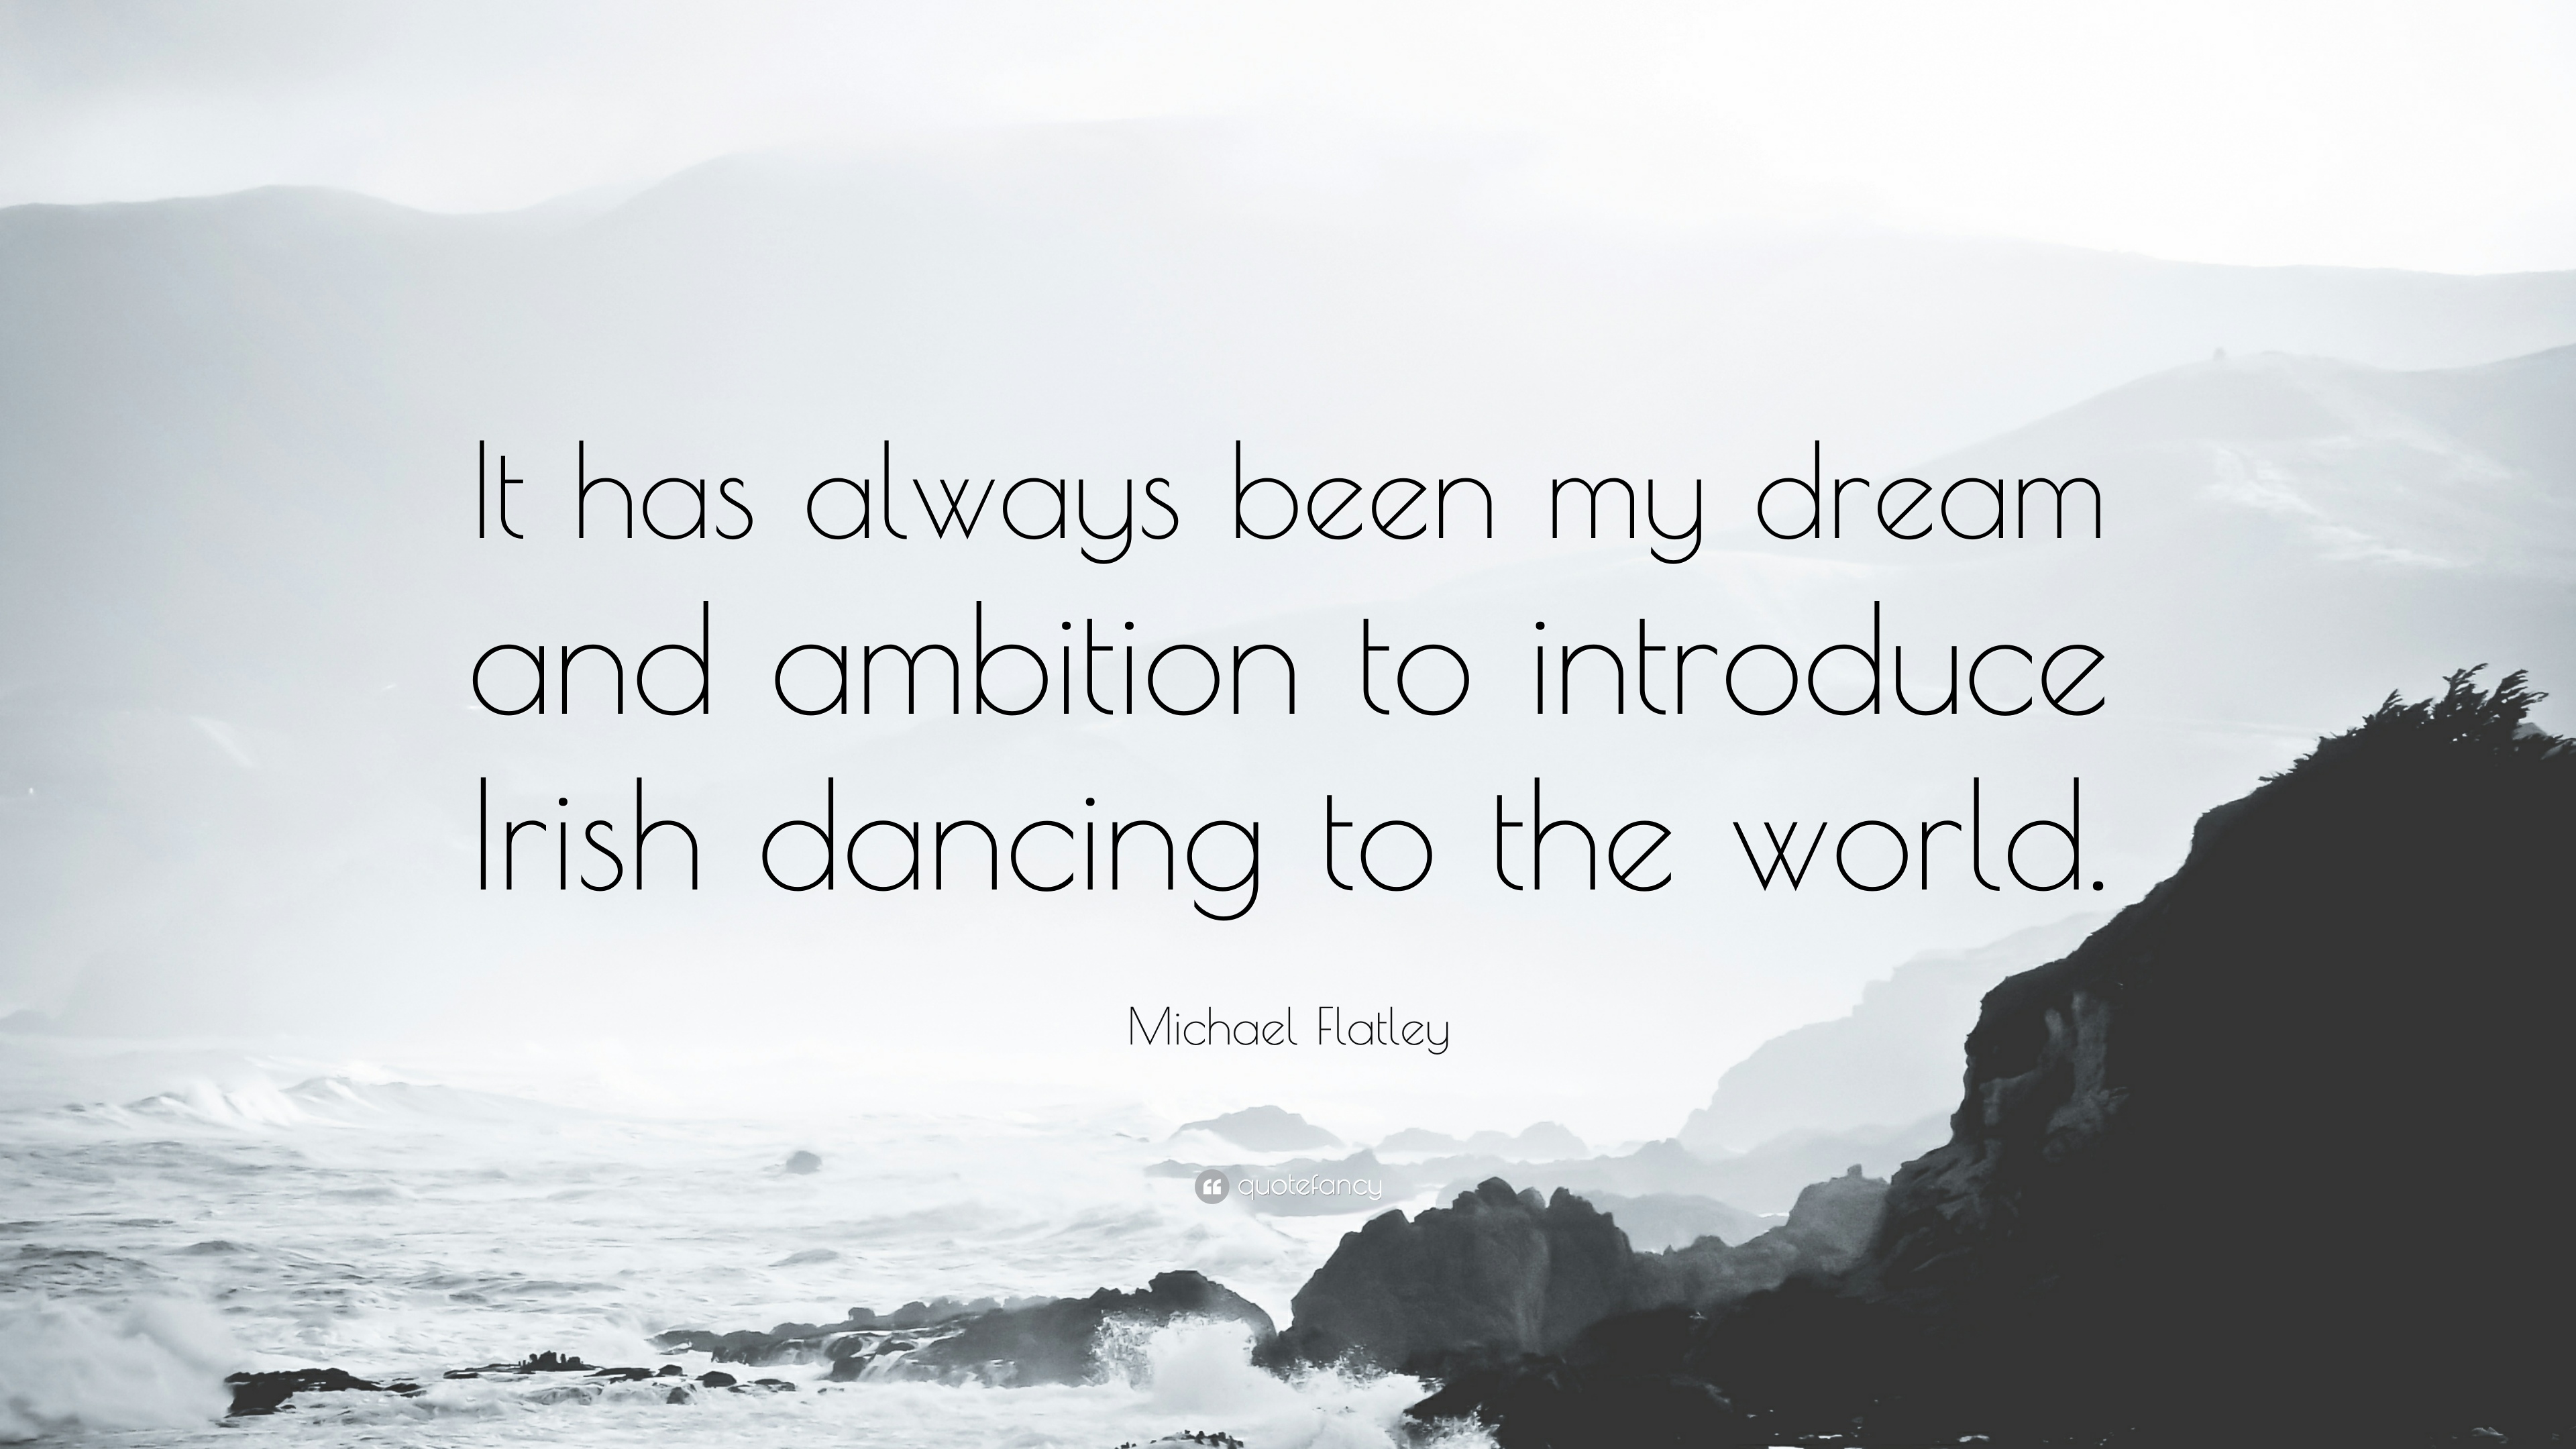 Michael Flatley Quote: “It has always been my dream and ambition to